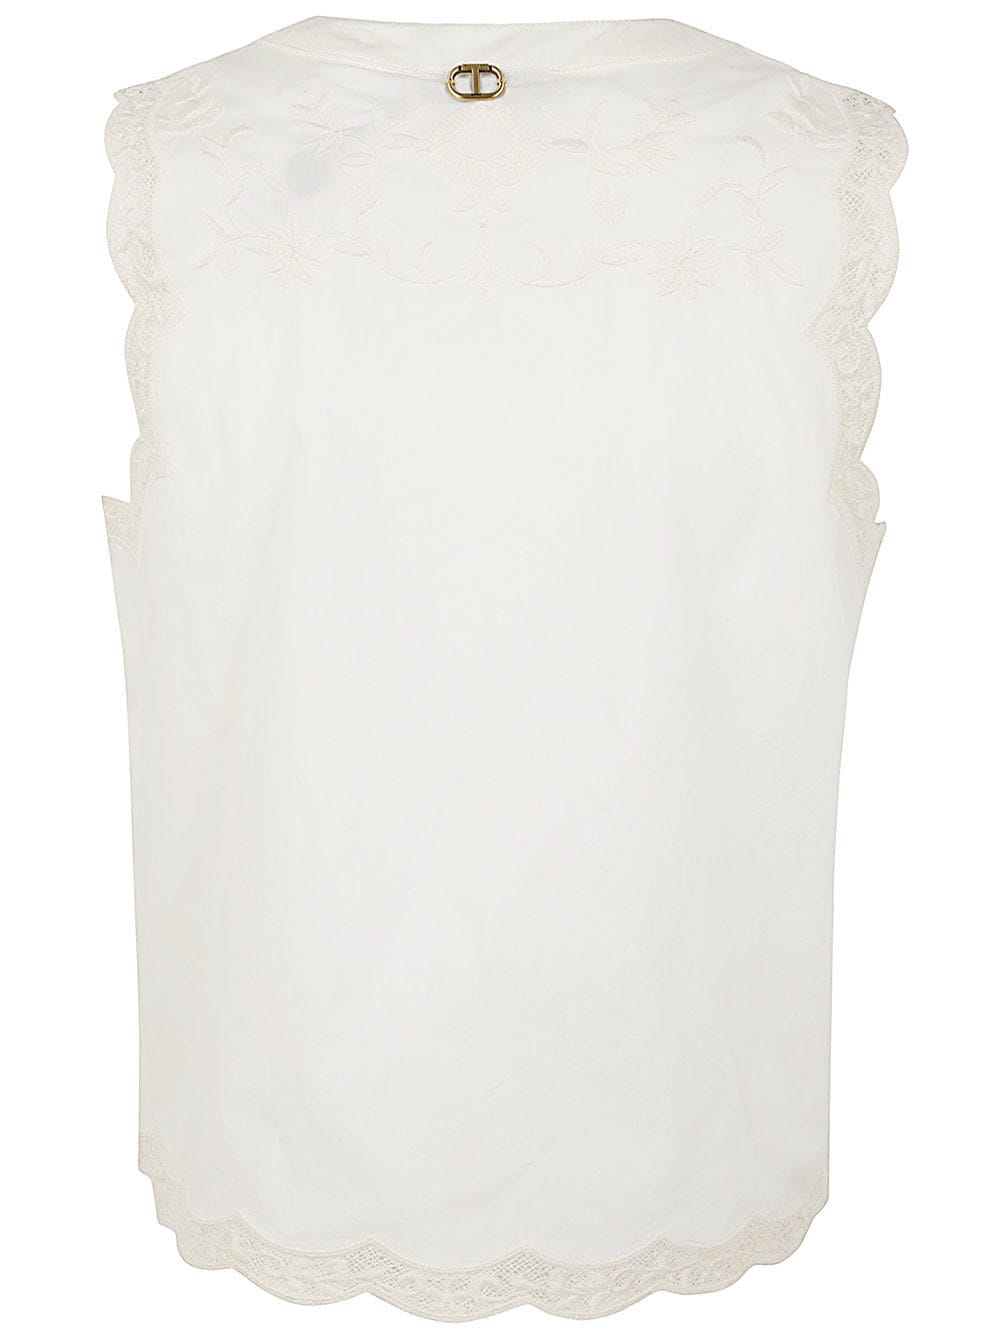 Shop Twinset Embroidered Sleeveless Shirt In Optic White